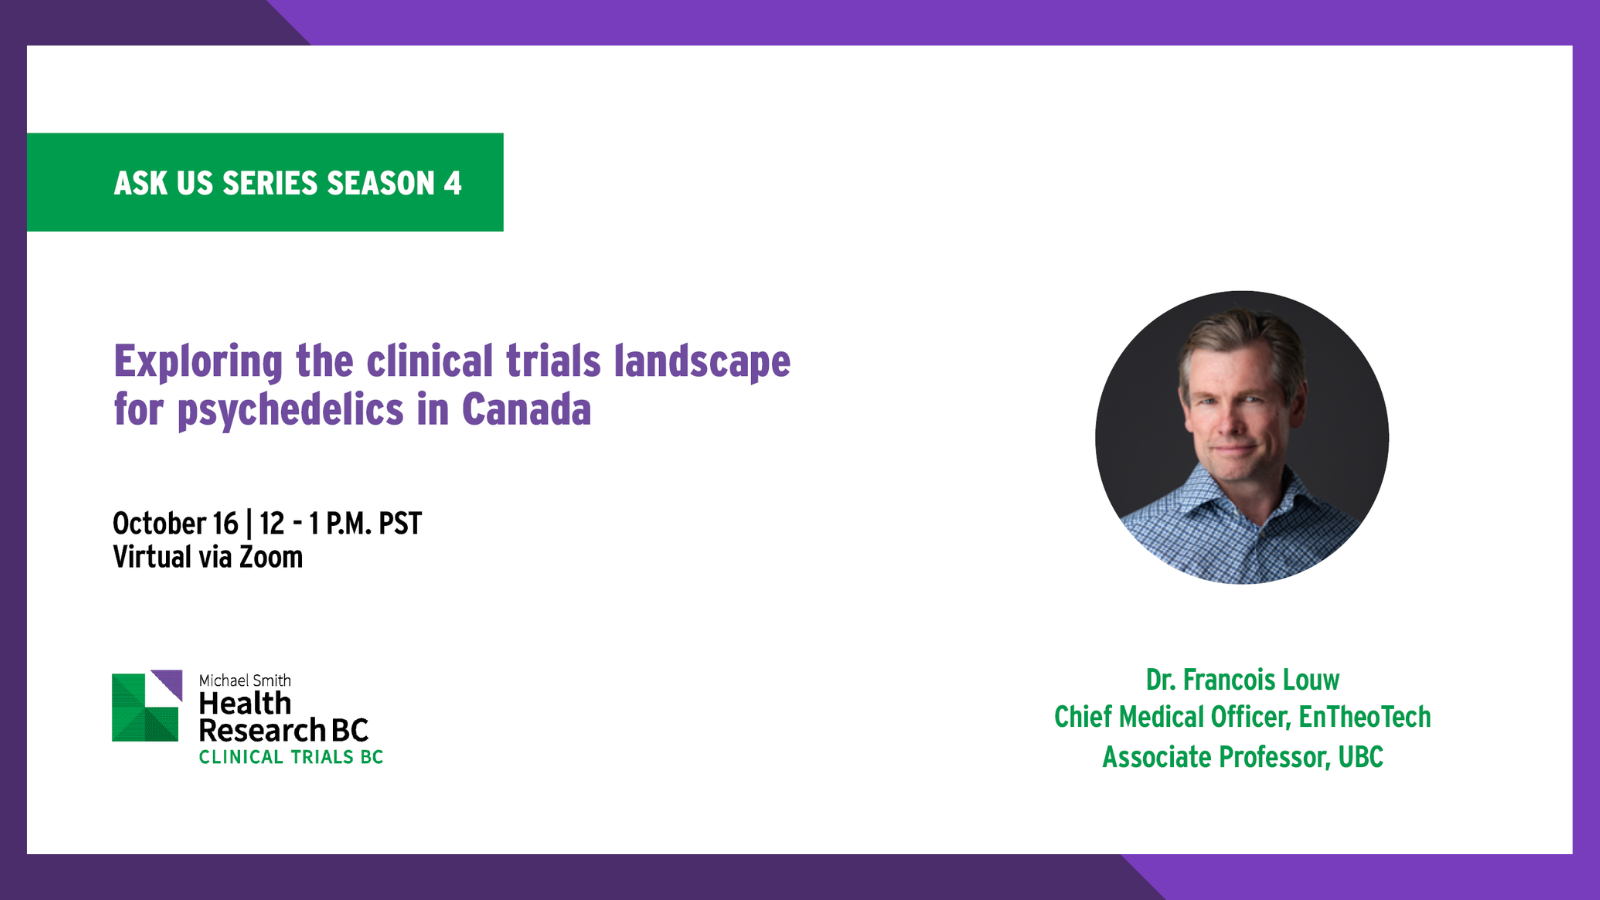 ASK US series: Exploring the clinical trials landscape for psychedelics in Canada